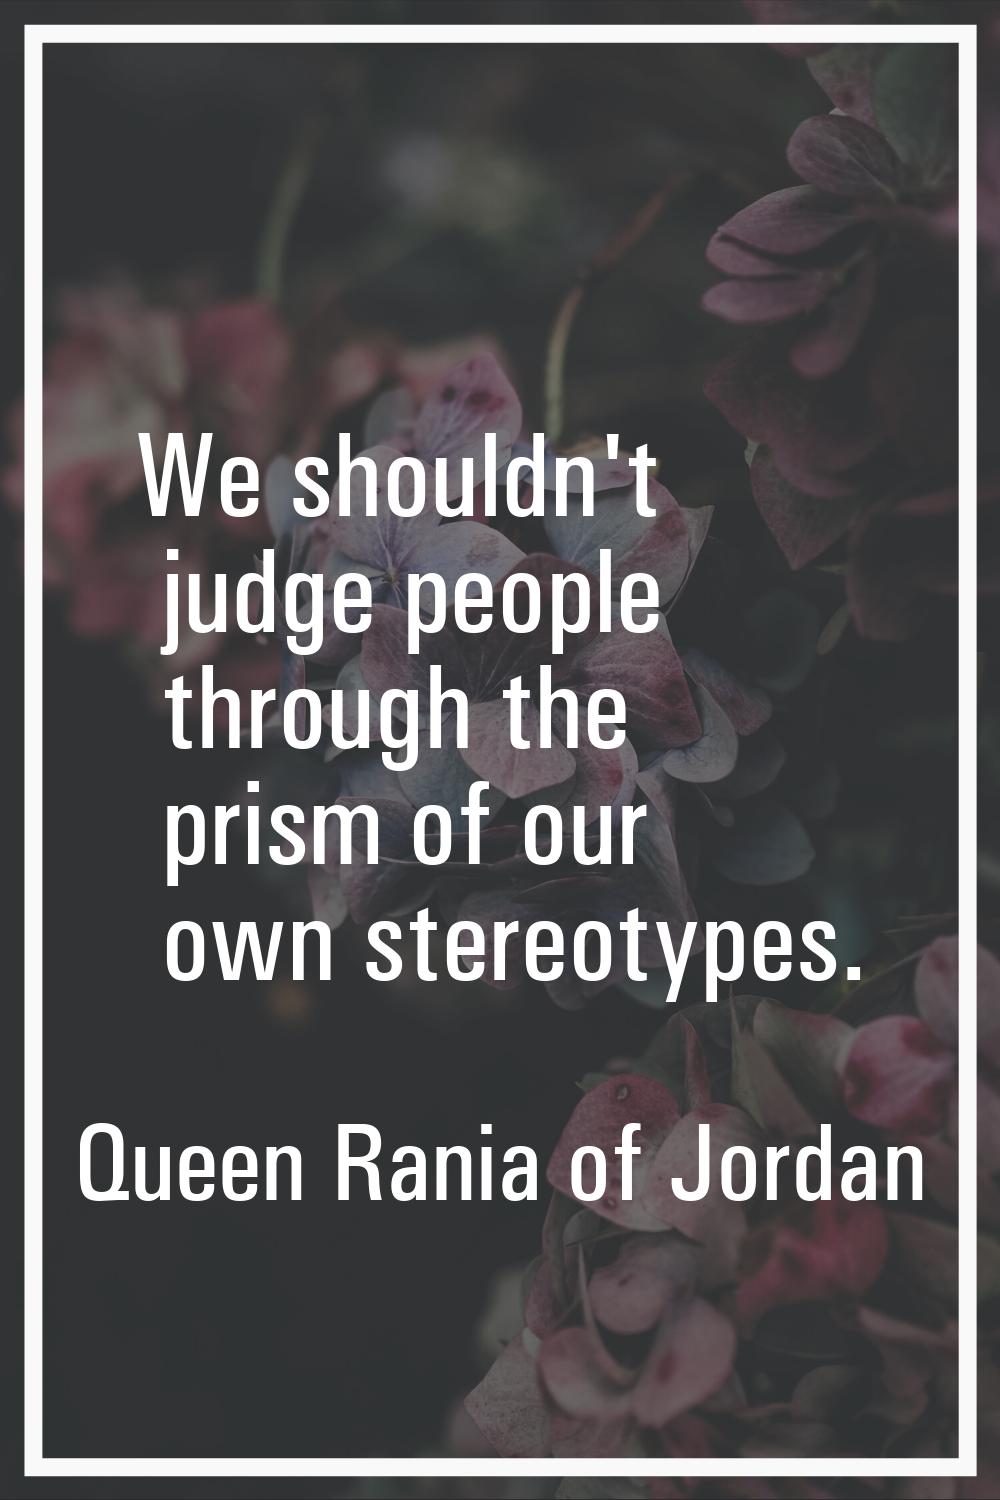 We shouldn't judge people through the prism of our own stereotypes.